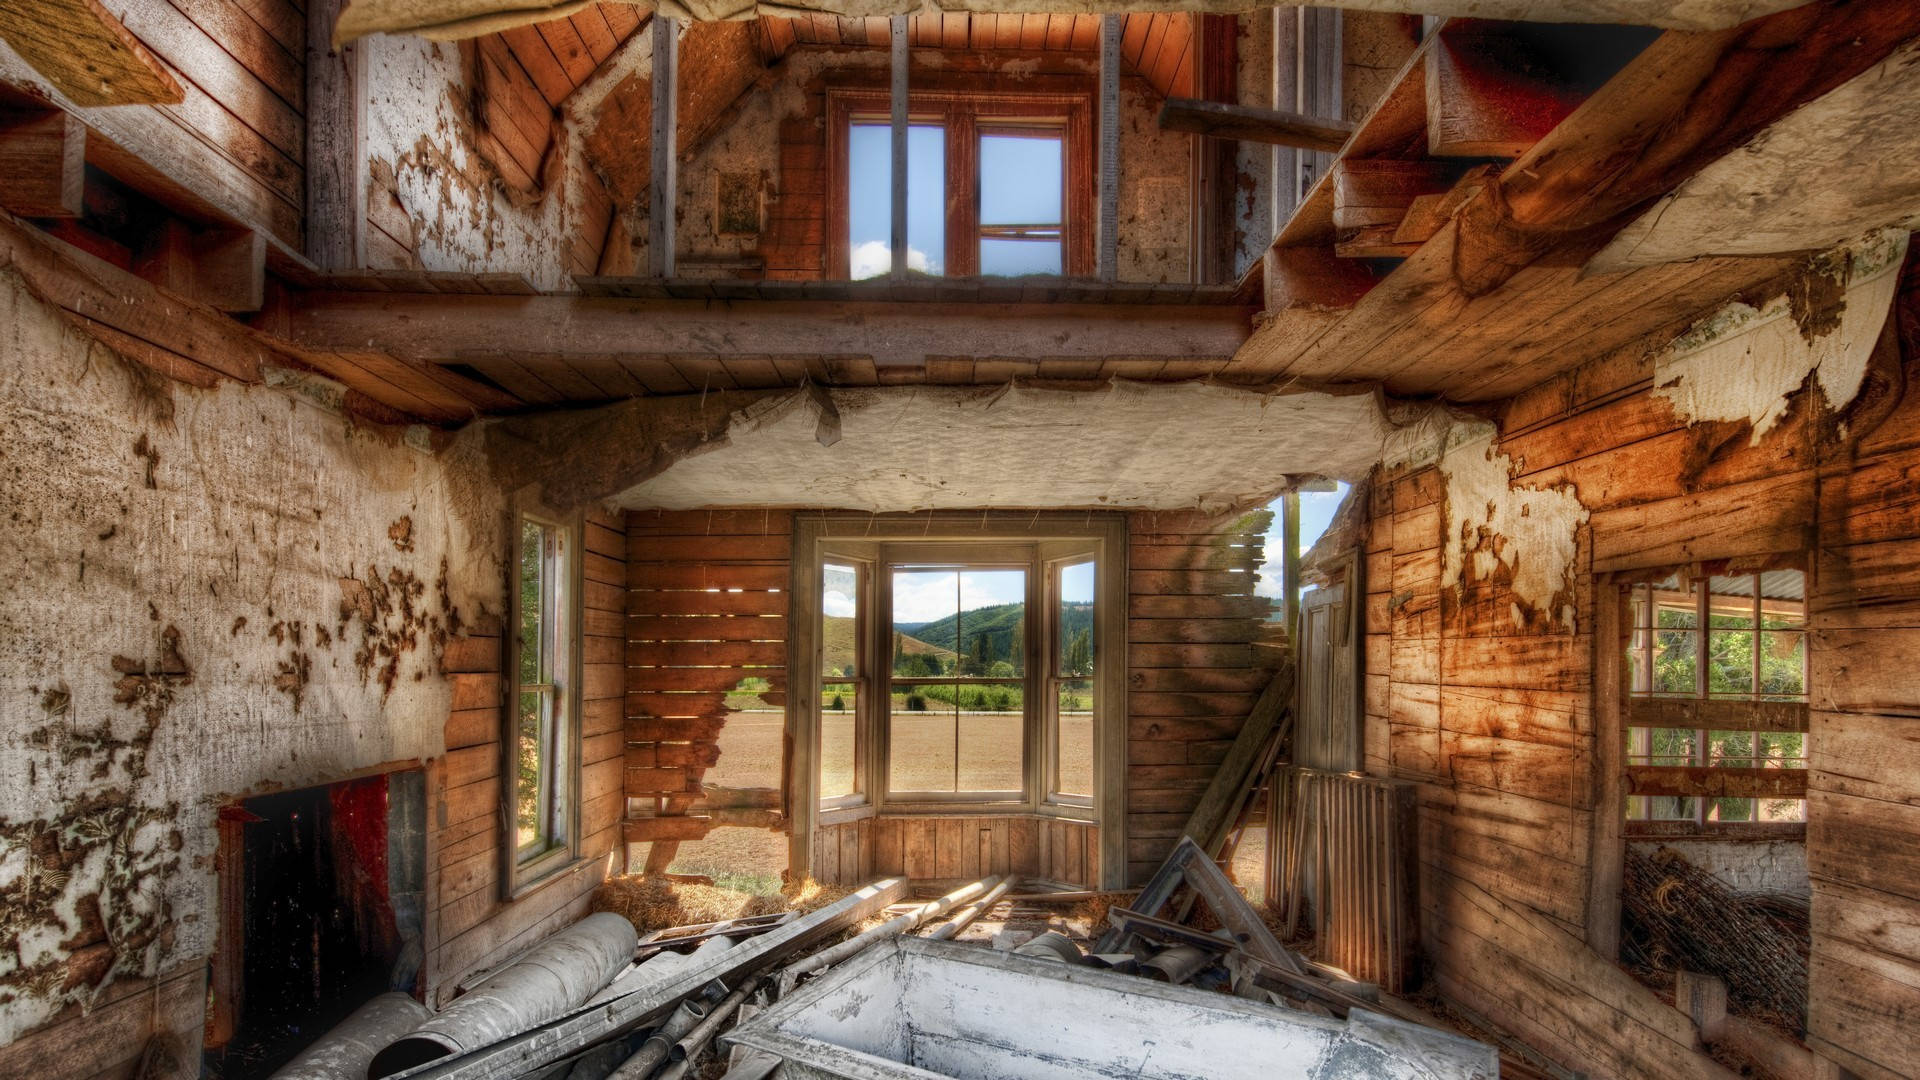 Destroyed Wooden House Wallpaper